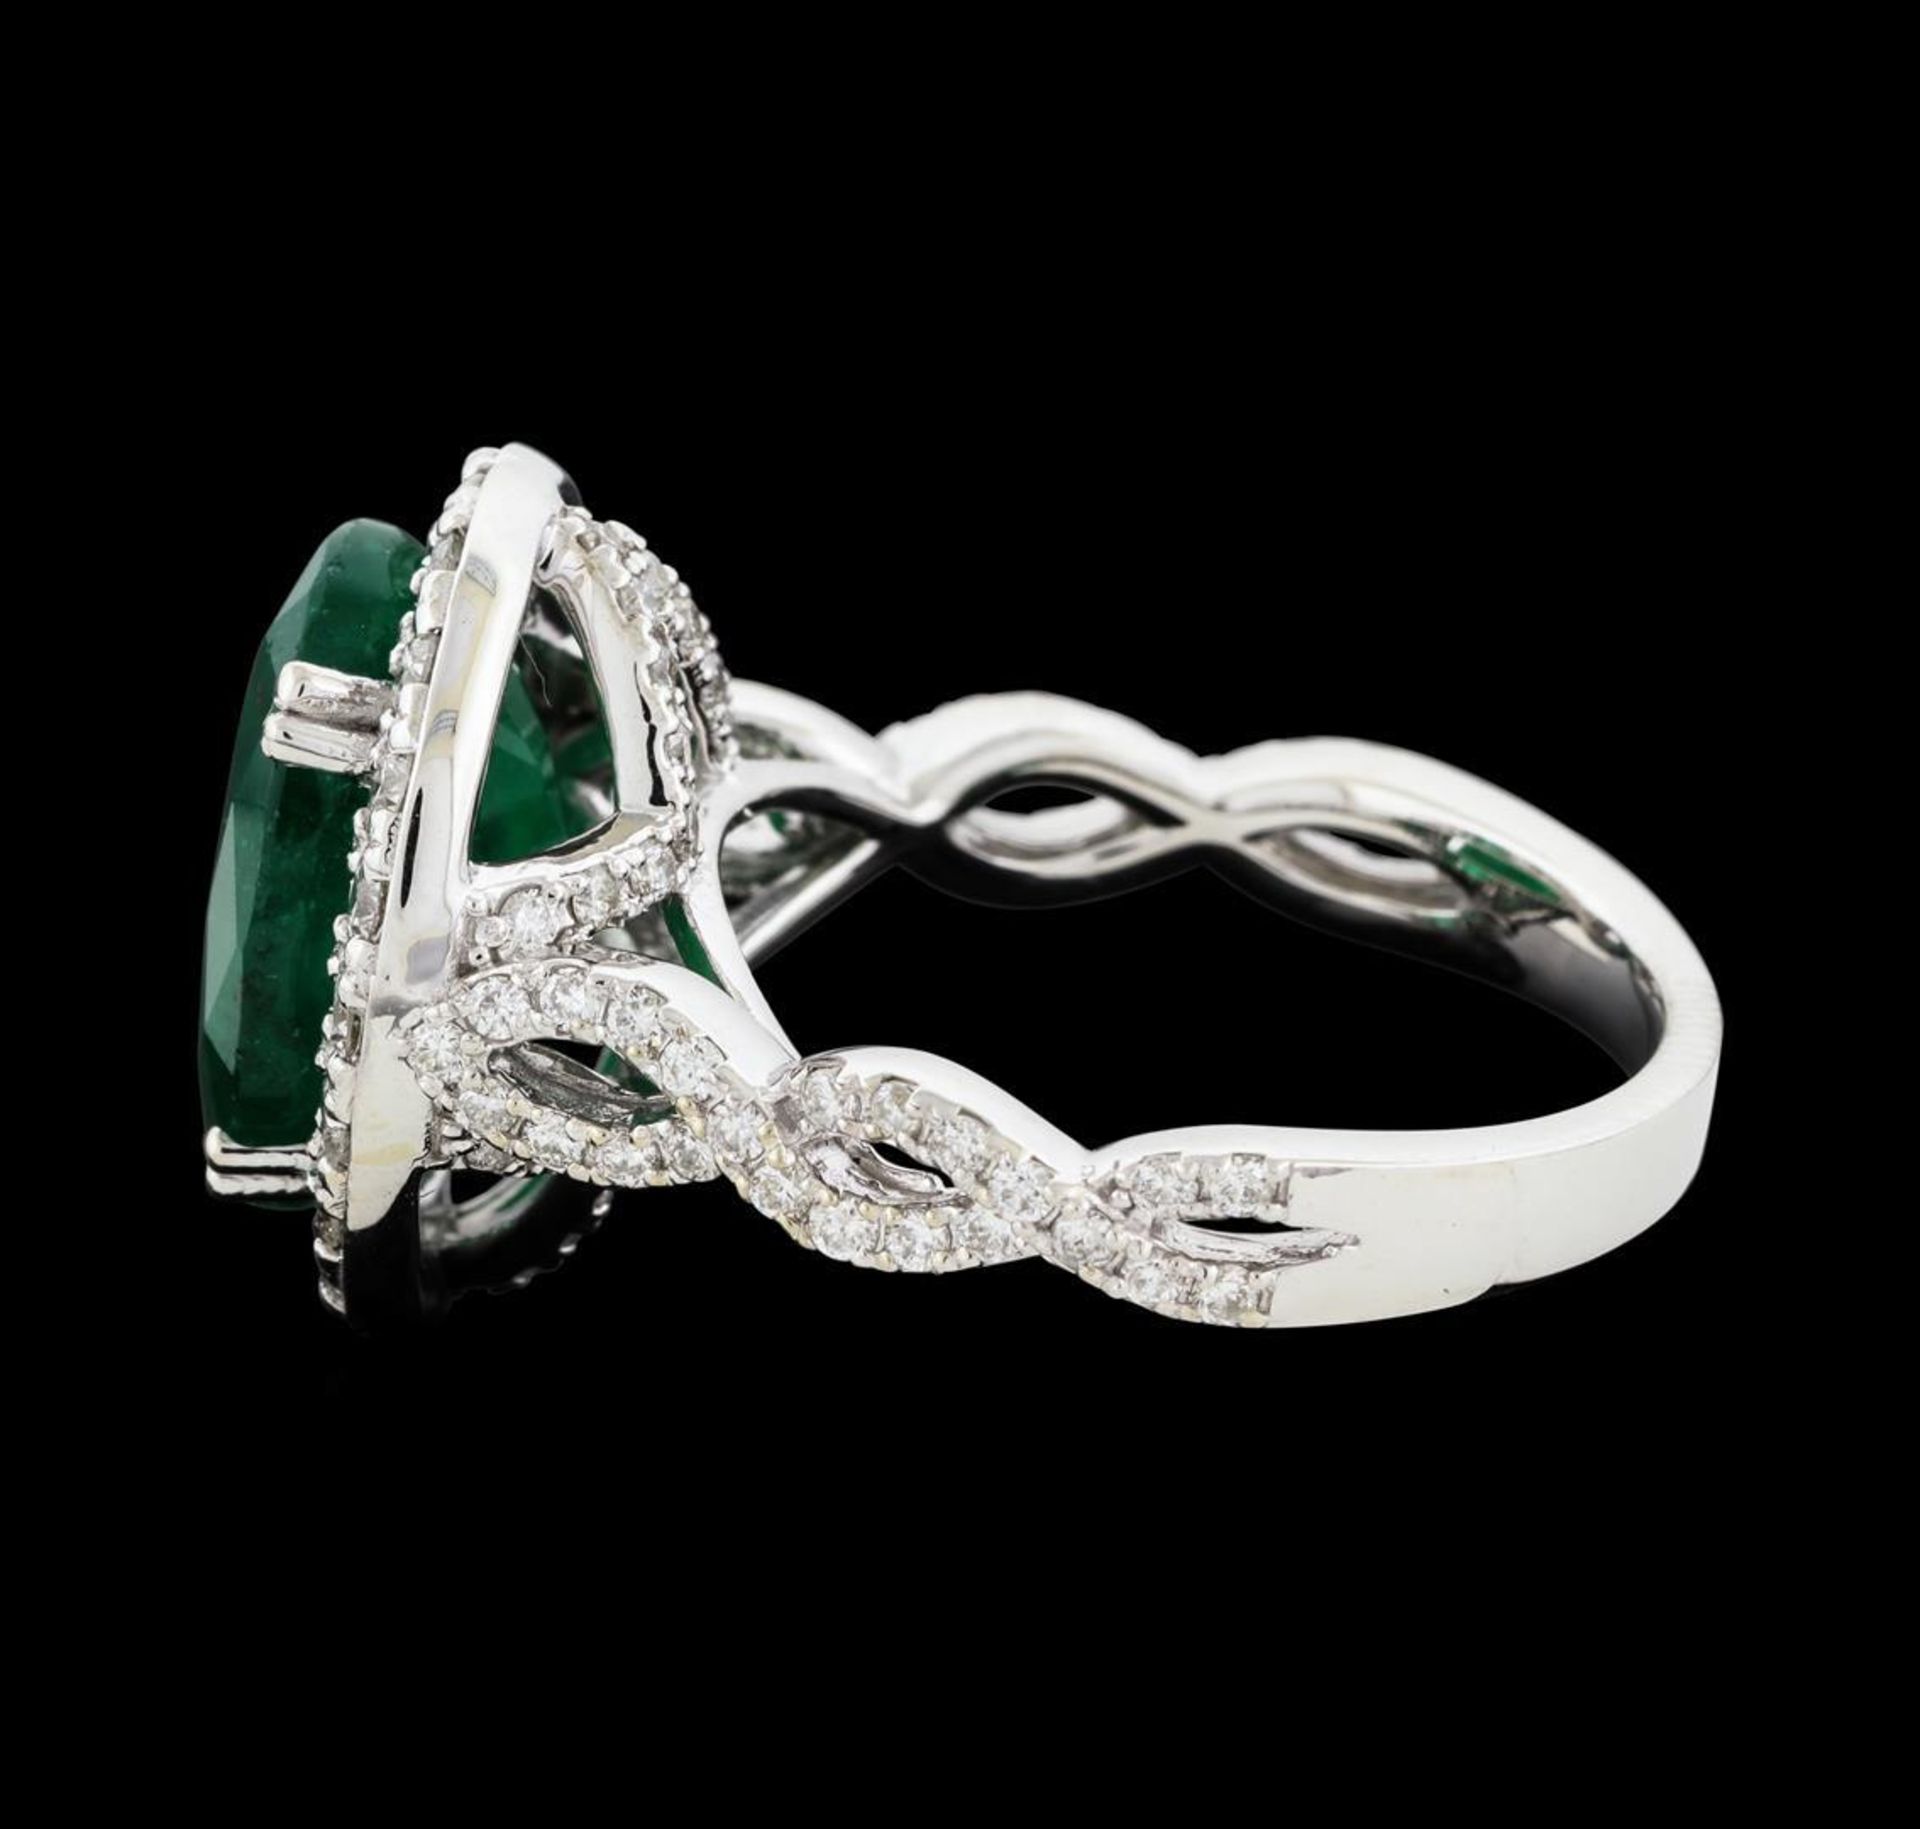 5.68 ctw Emerald and Diamond Ring - 14KT White Gold - Image 3 of 5